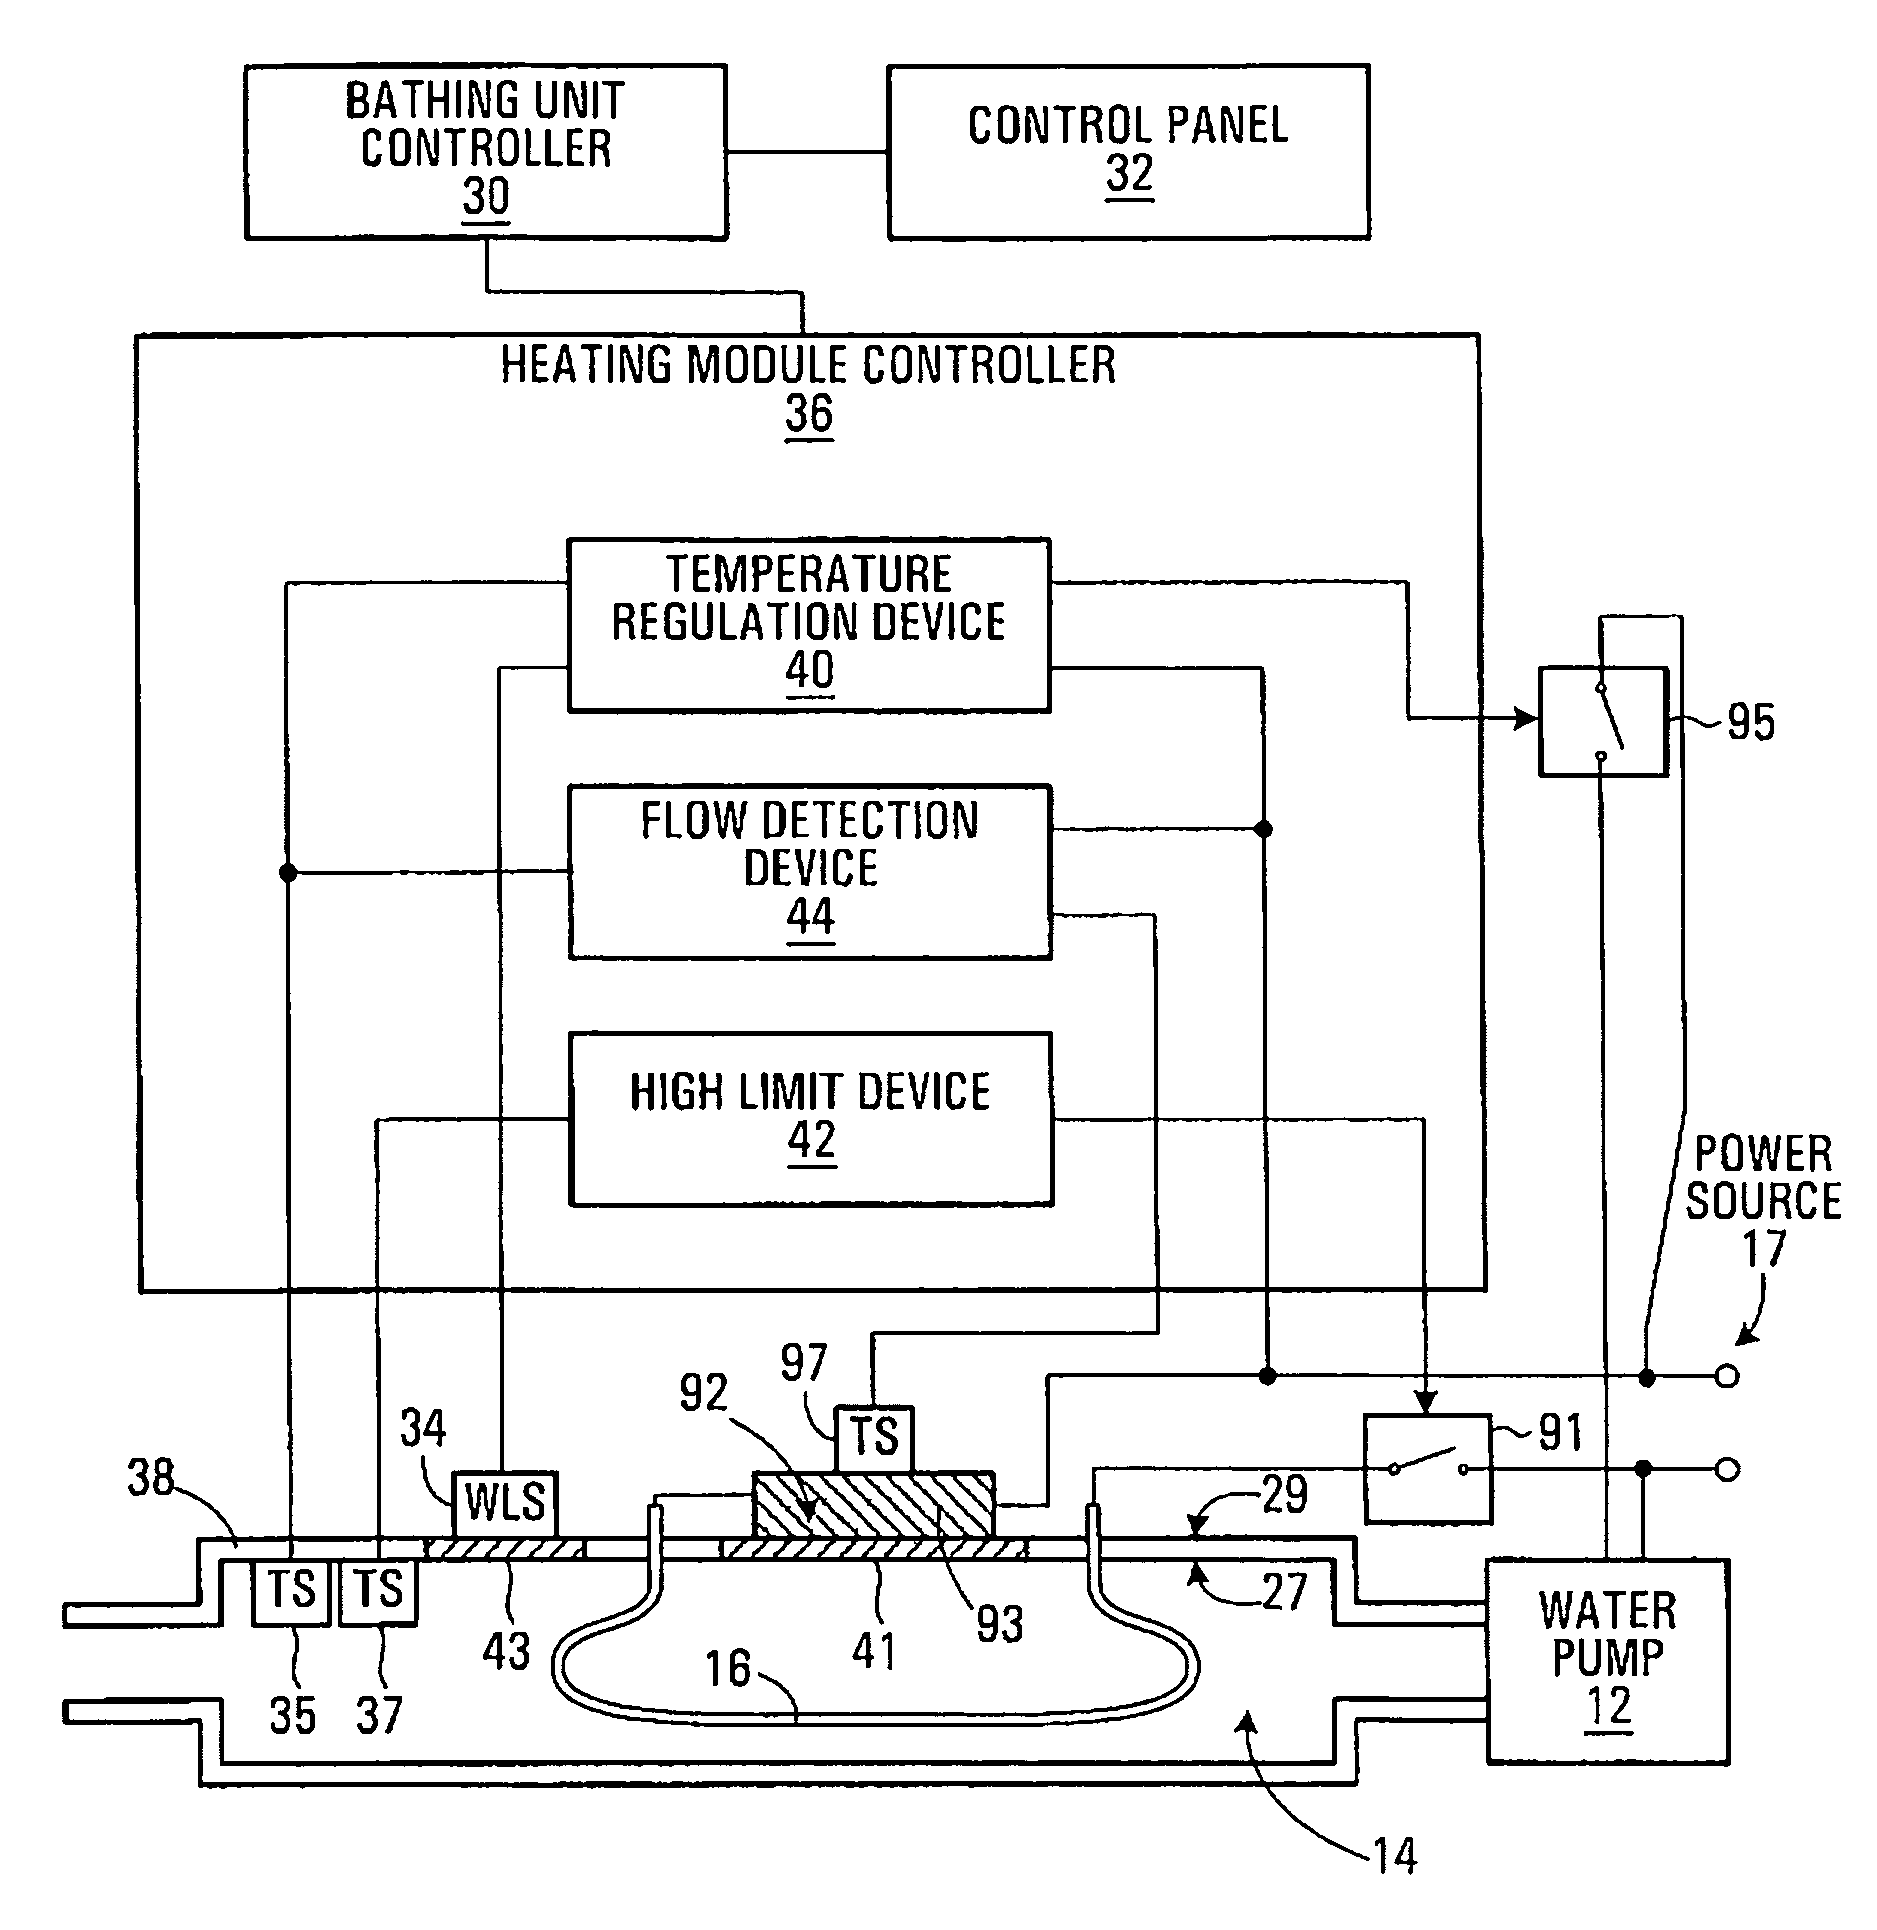 Water flow detection system for a bathing unit